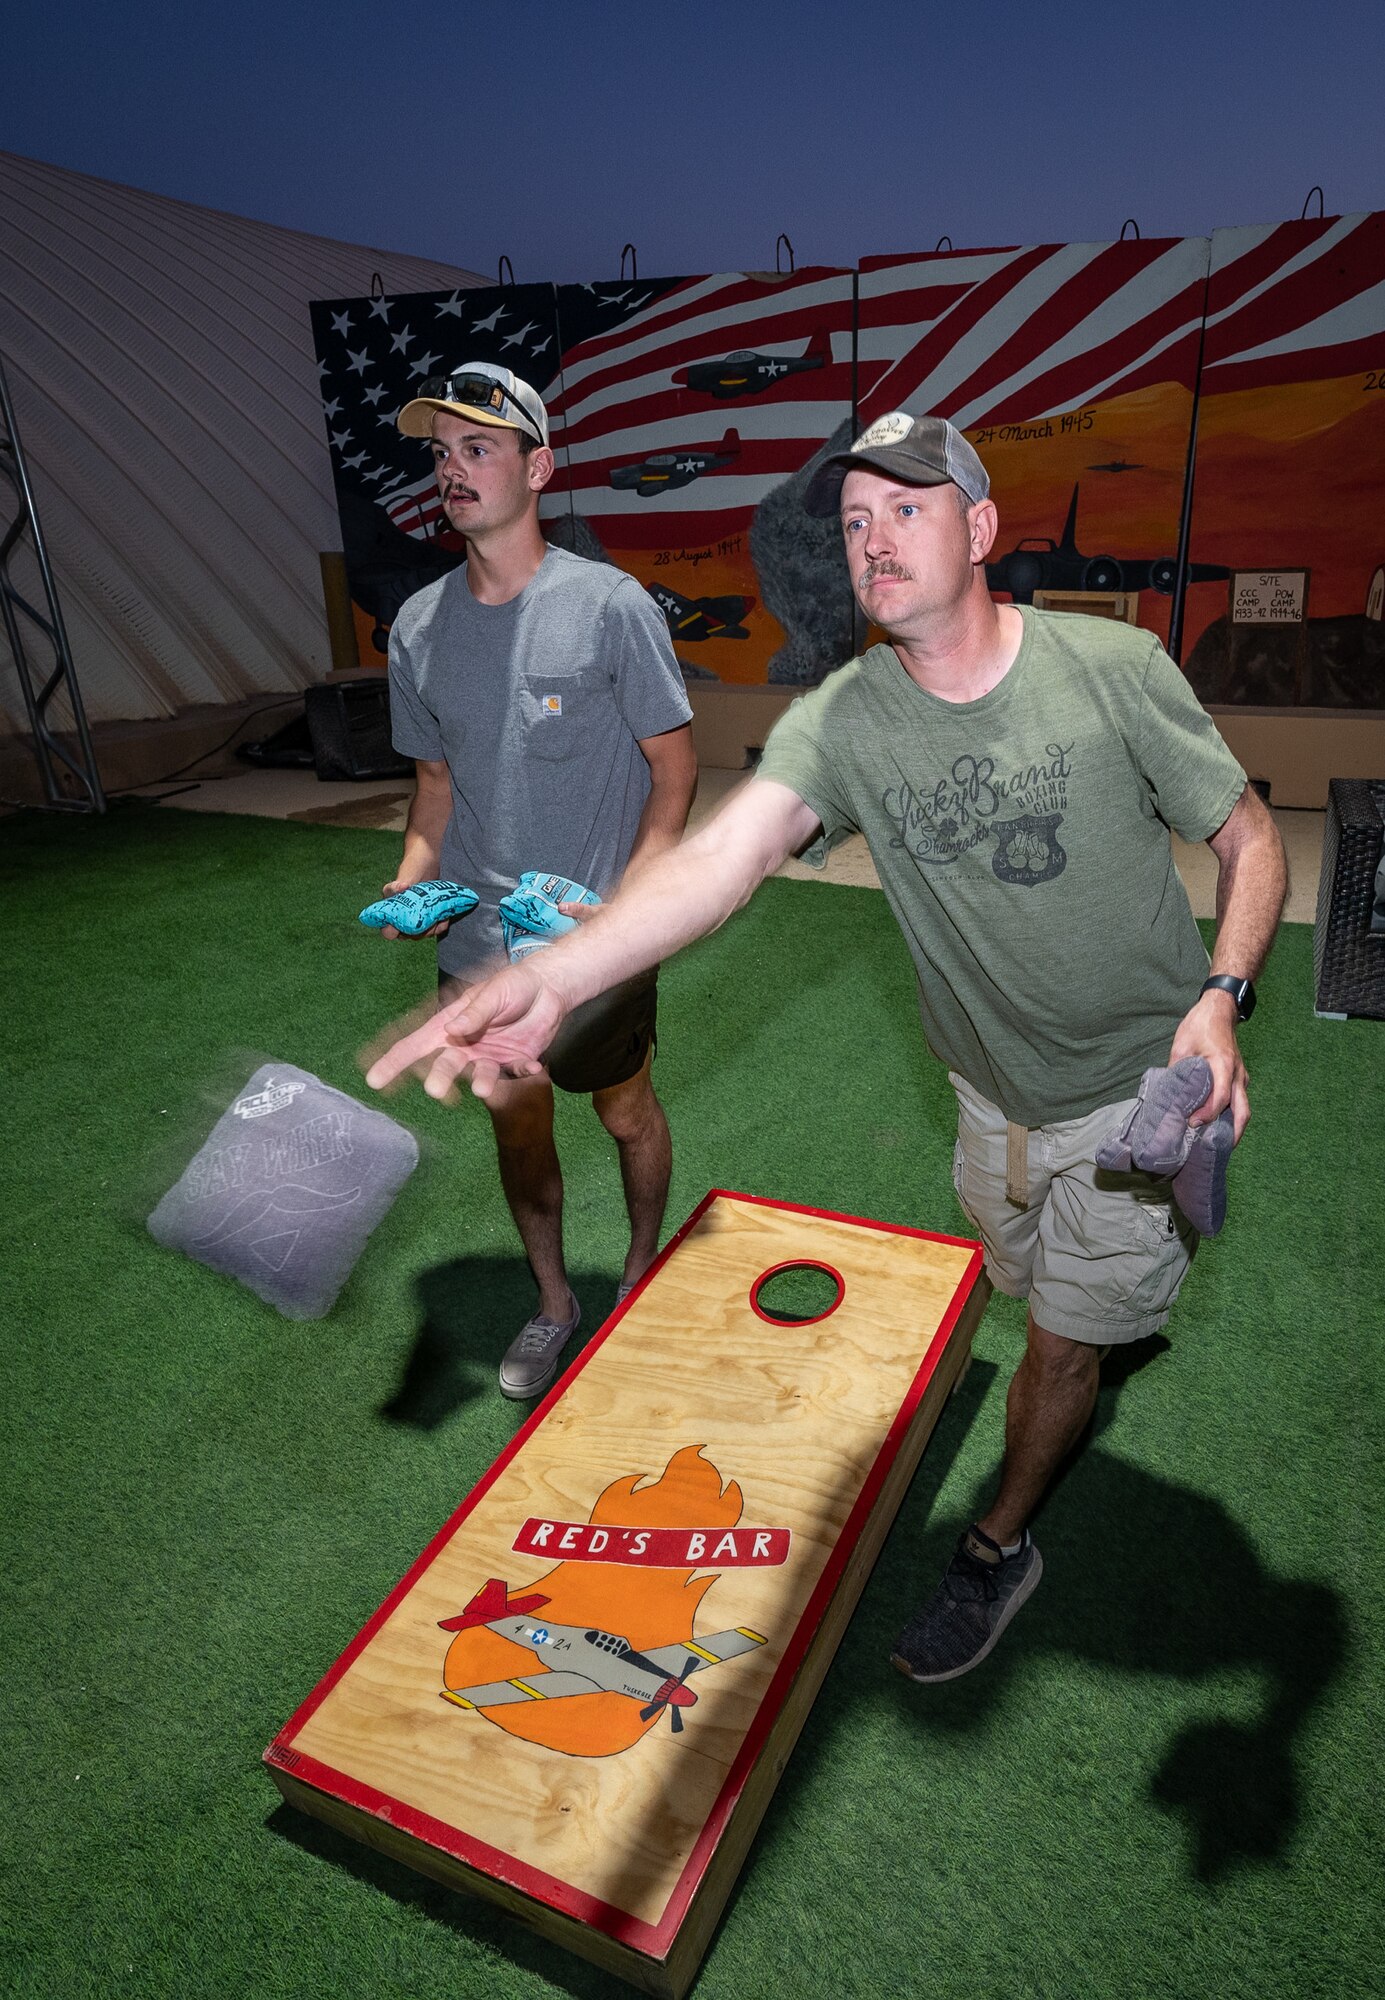 Master Sgt. Timothy Travis, 332 Expeditionary Civil Engineer Squadron operations management superintendent, tossing the bag, and Senior Airman Joshua Grimm, 332 ECES structural journeyman, warm up for a bag toss tournament at an undisclosed location in Southwest Asia, June 9, 2022. Airman First Class Bryson Doll, 332d Expeditionary Civil Engineer Squadron structural apprentice, used his woodworking skills and free time to build and hand paint the bag toss boards that provide morale opportunities for Red Tails. (U.S. Air Force photo by Master Sgt. Christopher Parr)